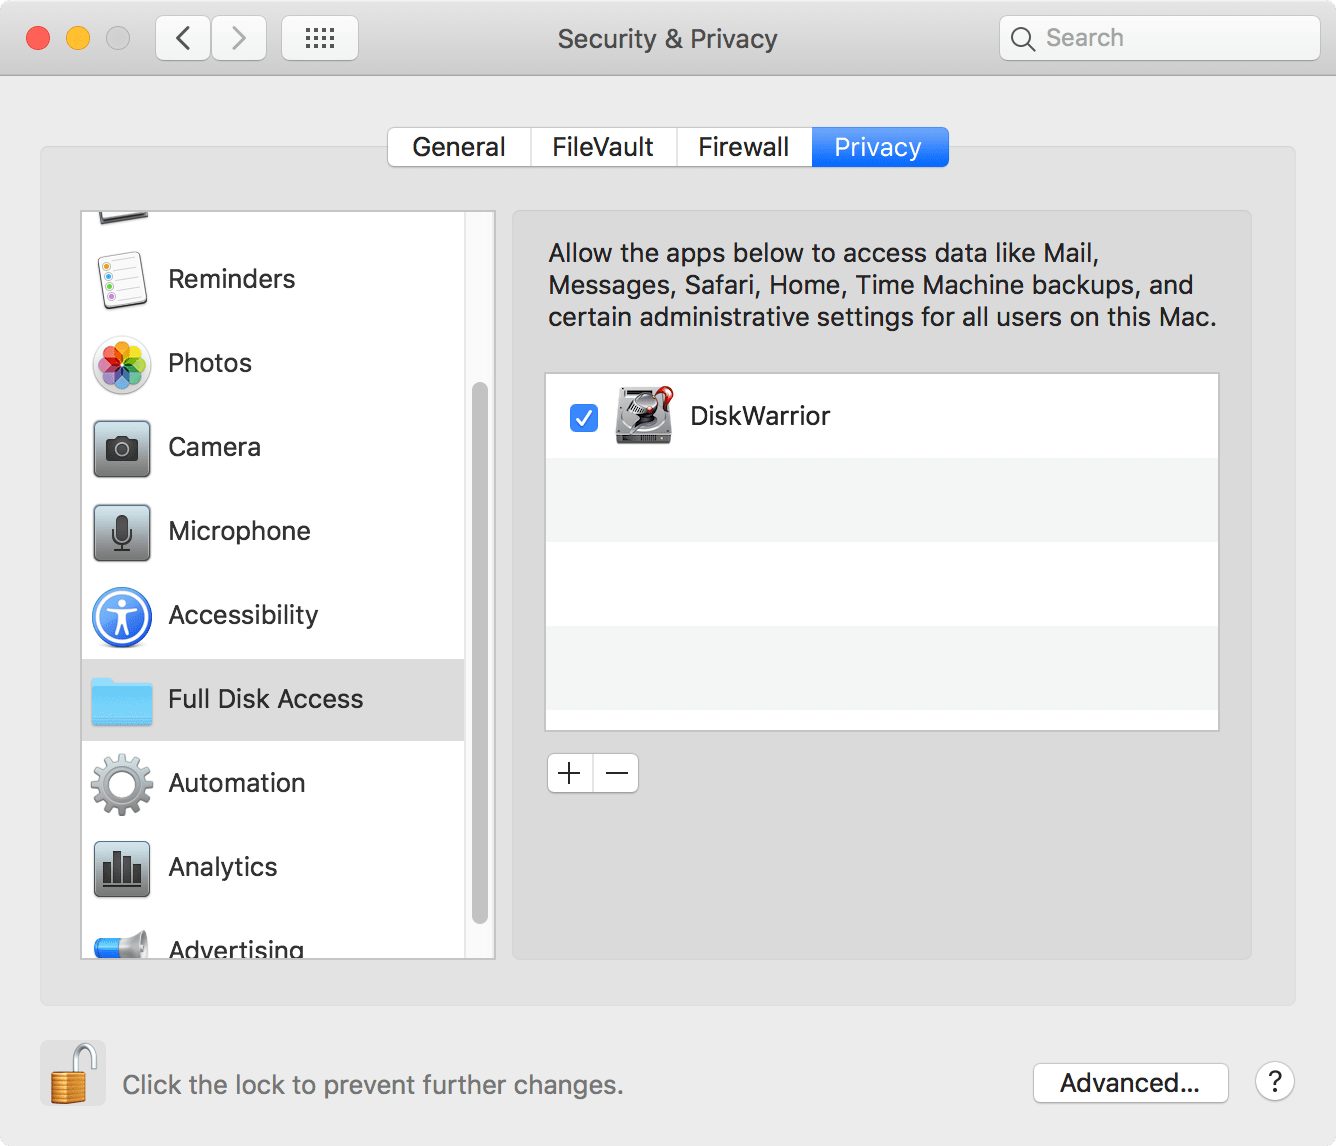 Diskwarrior in Full Disk Access in Privacy tab in Security & Privacy Preference pane in the System Preferences 